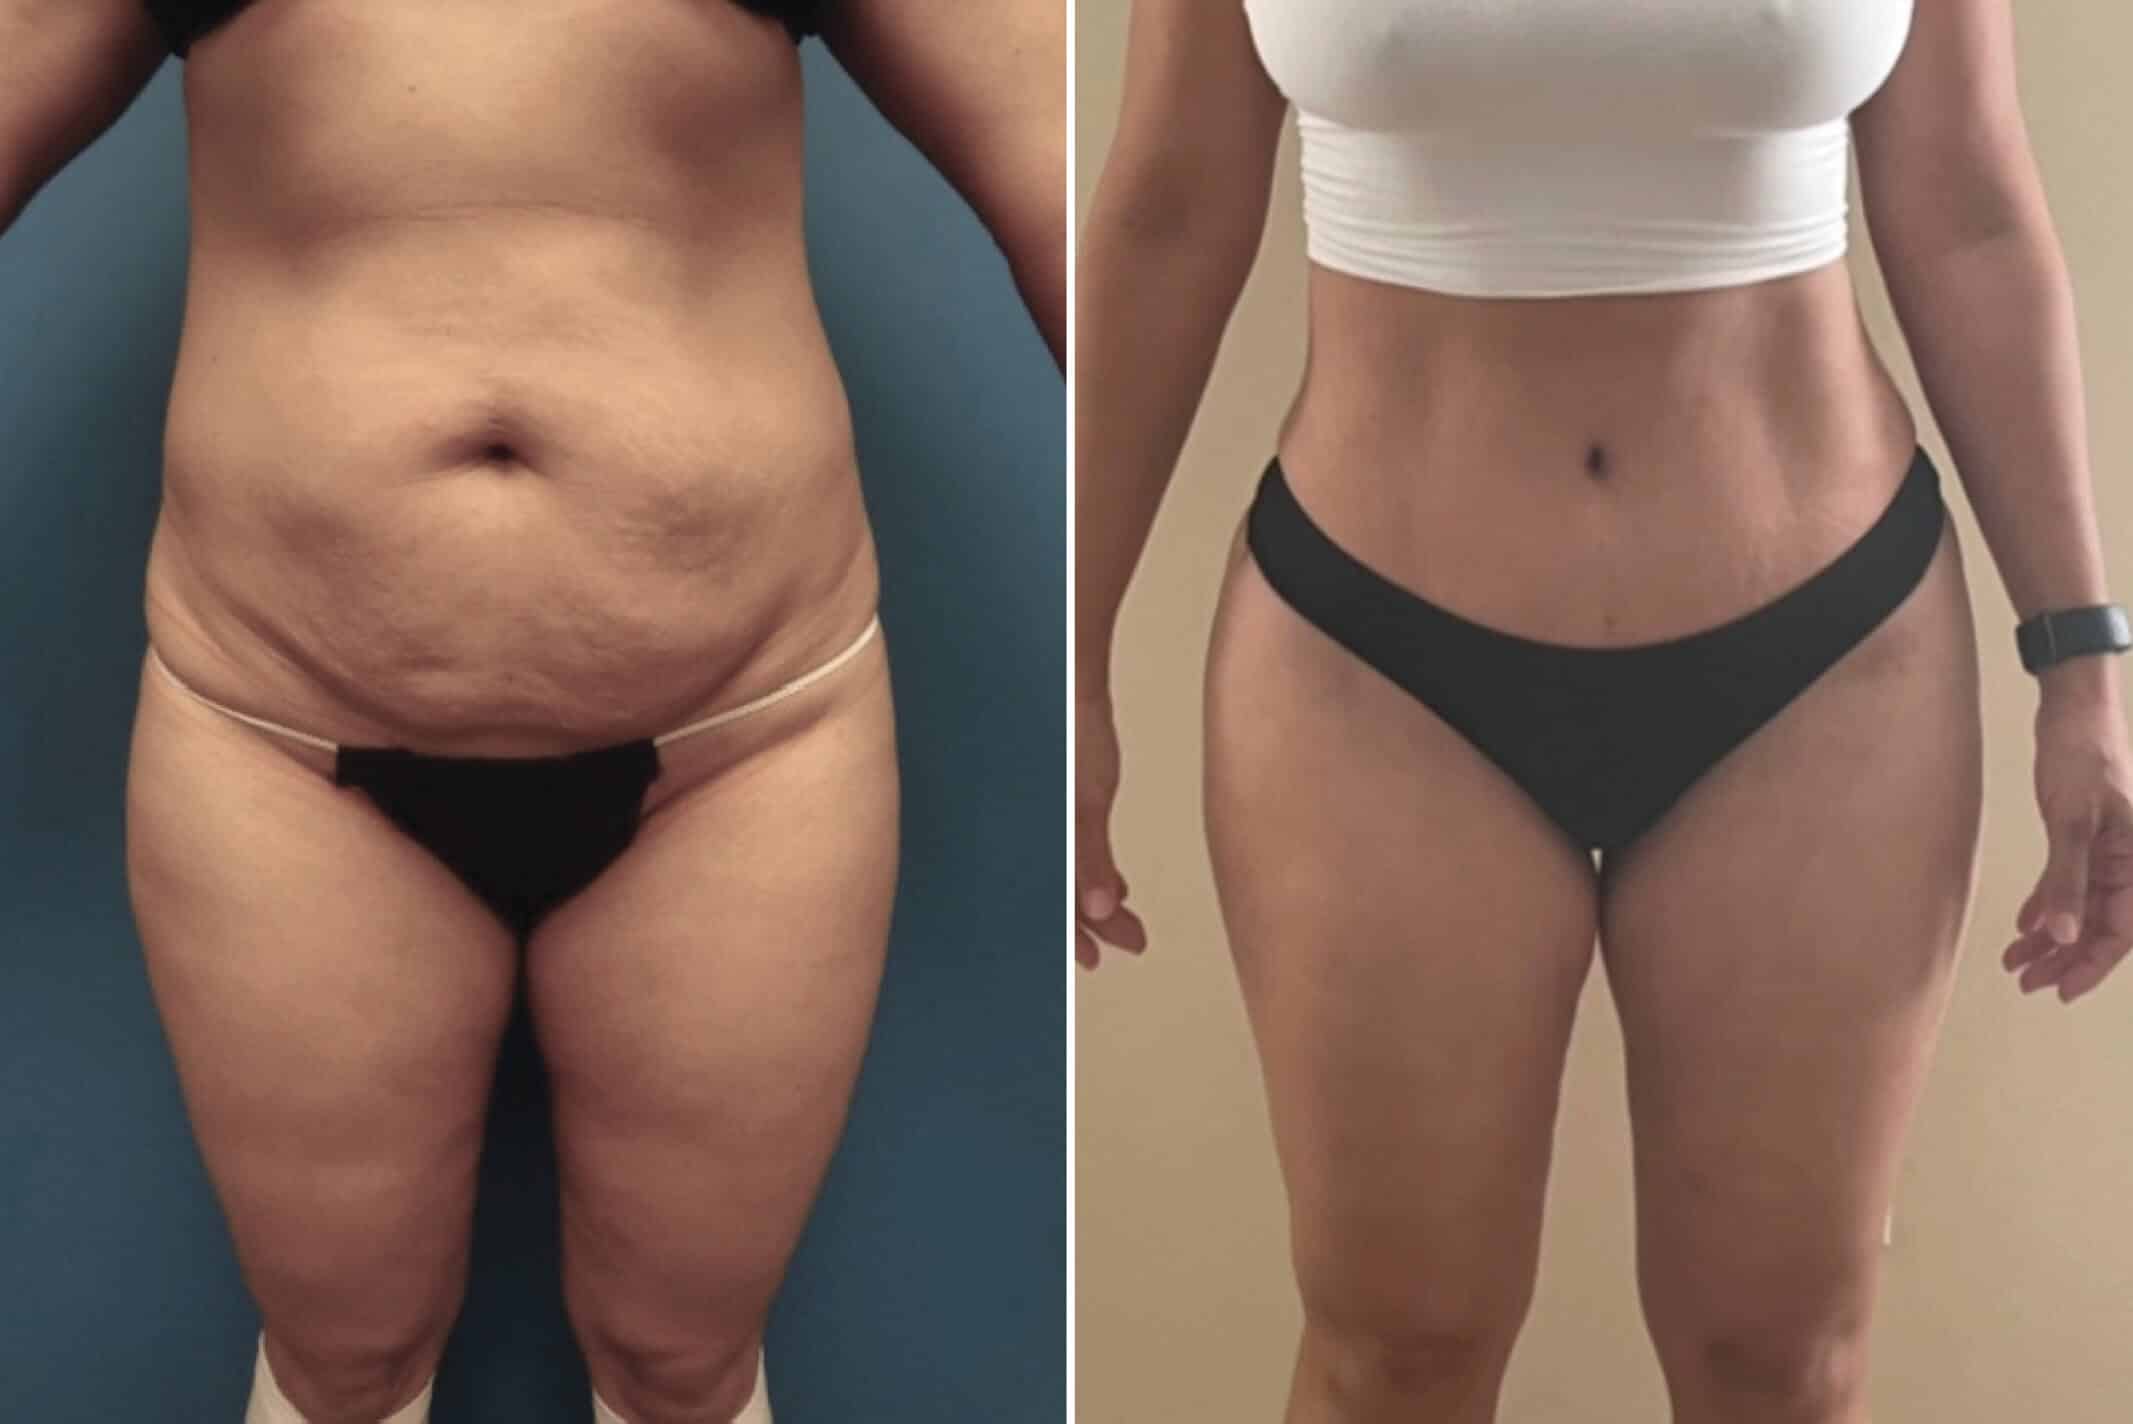 Our Before & After Body Sculpting Results in LA